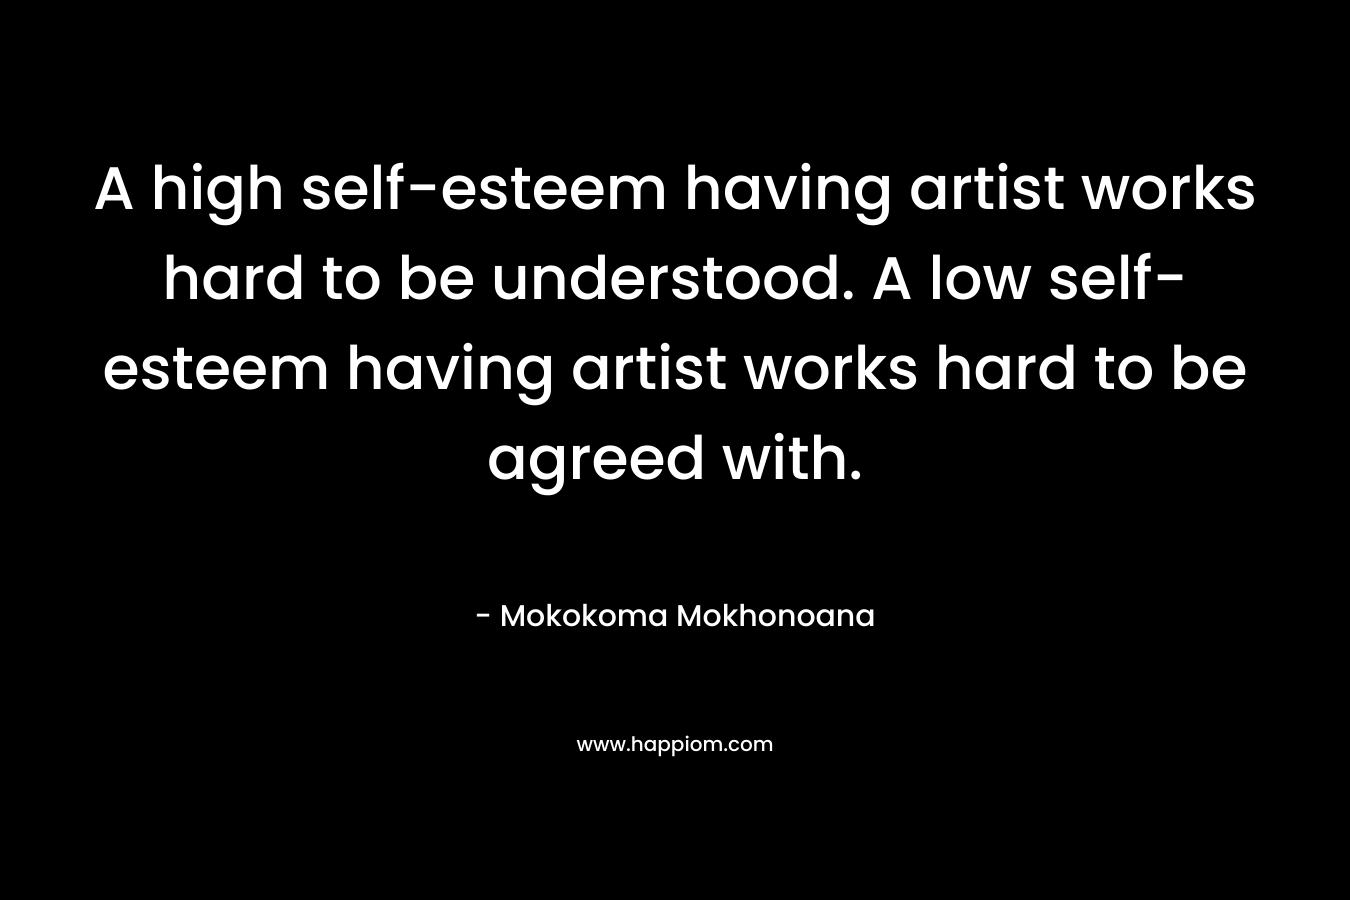 A high self-esteem having artist works hard to be understood. A low self-esteem having artist works hard to be agreed with.